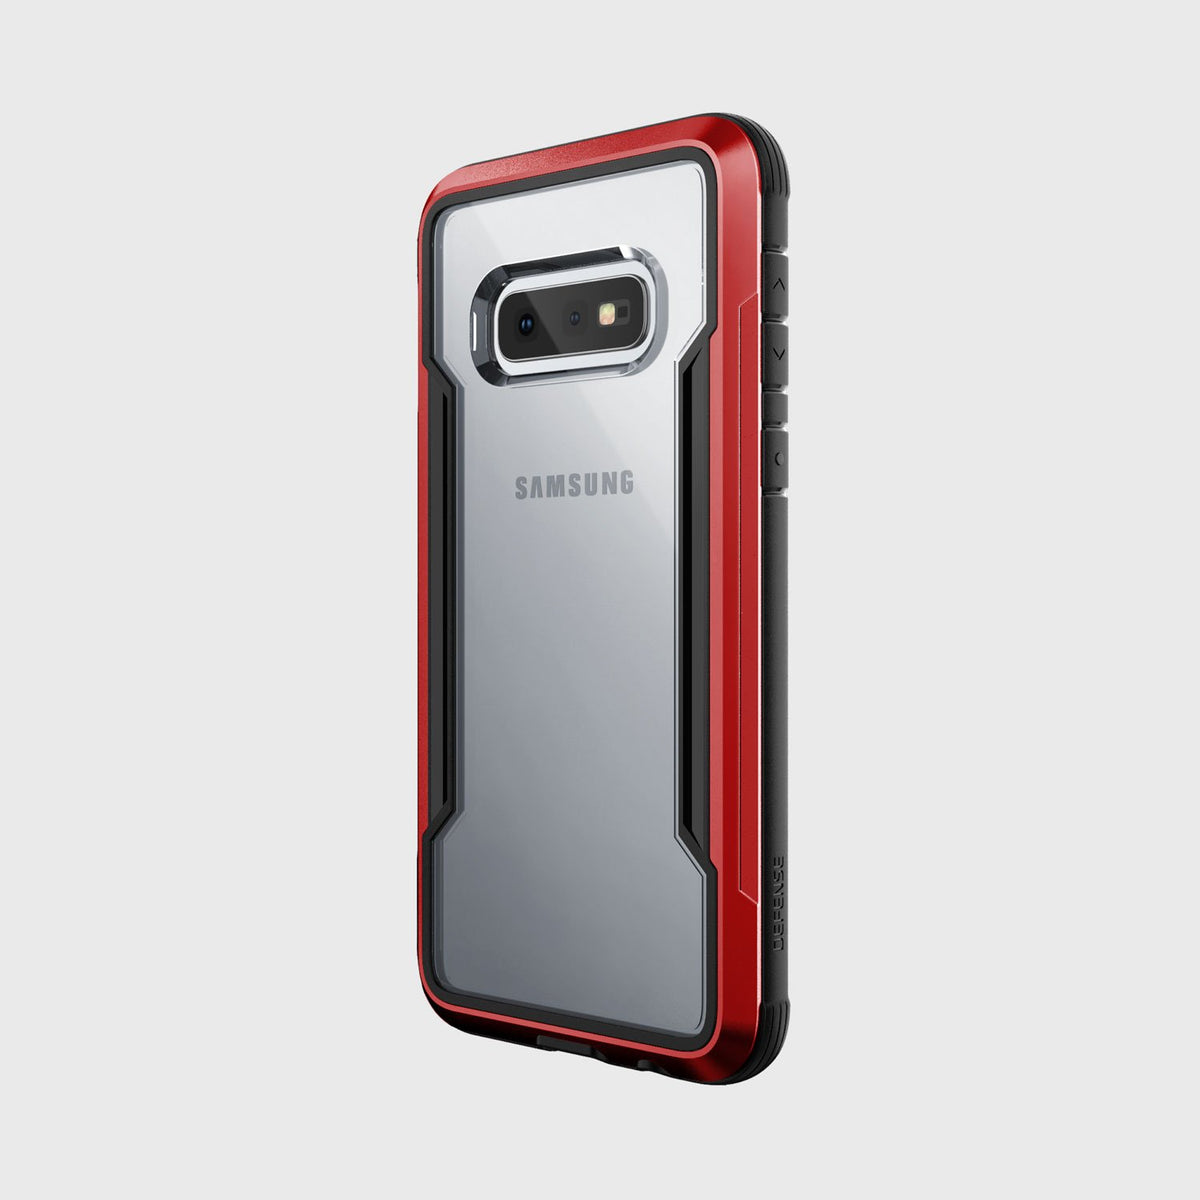 This Red and Black X-Doria Samsung Galaxy S10e Case Raptic Shield Red provides drop protection for your phone.